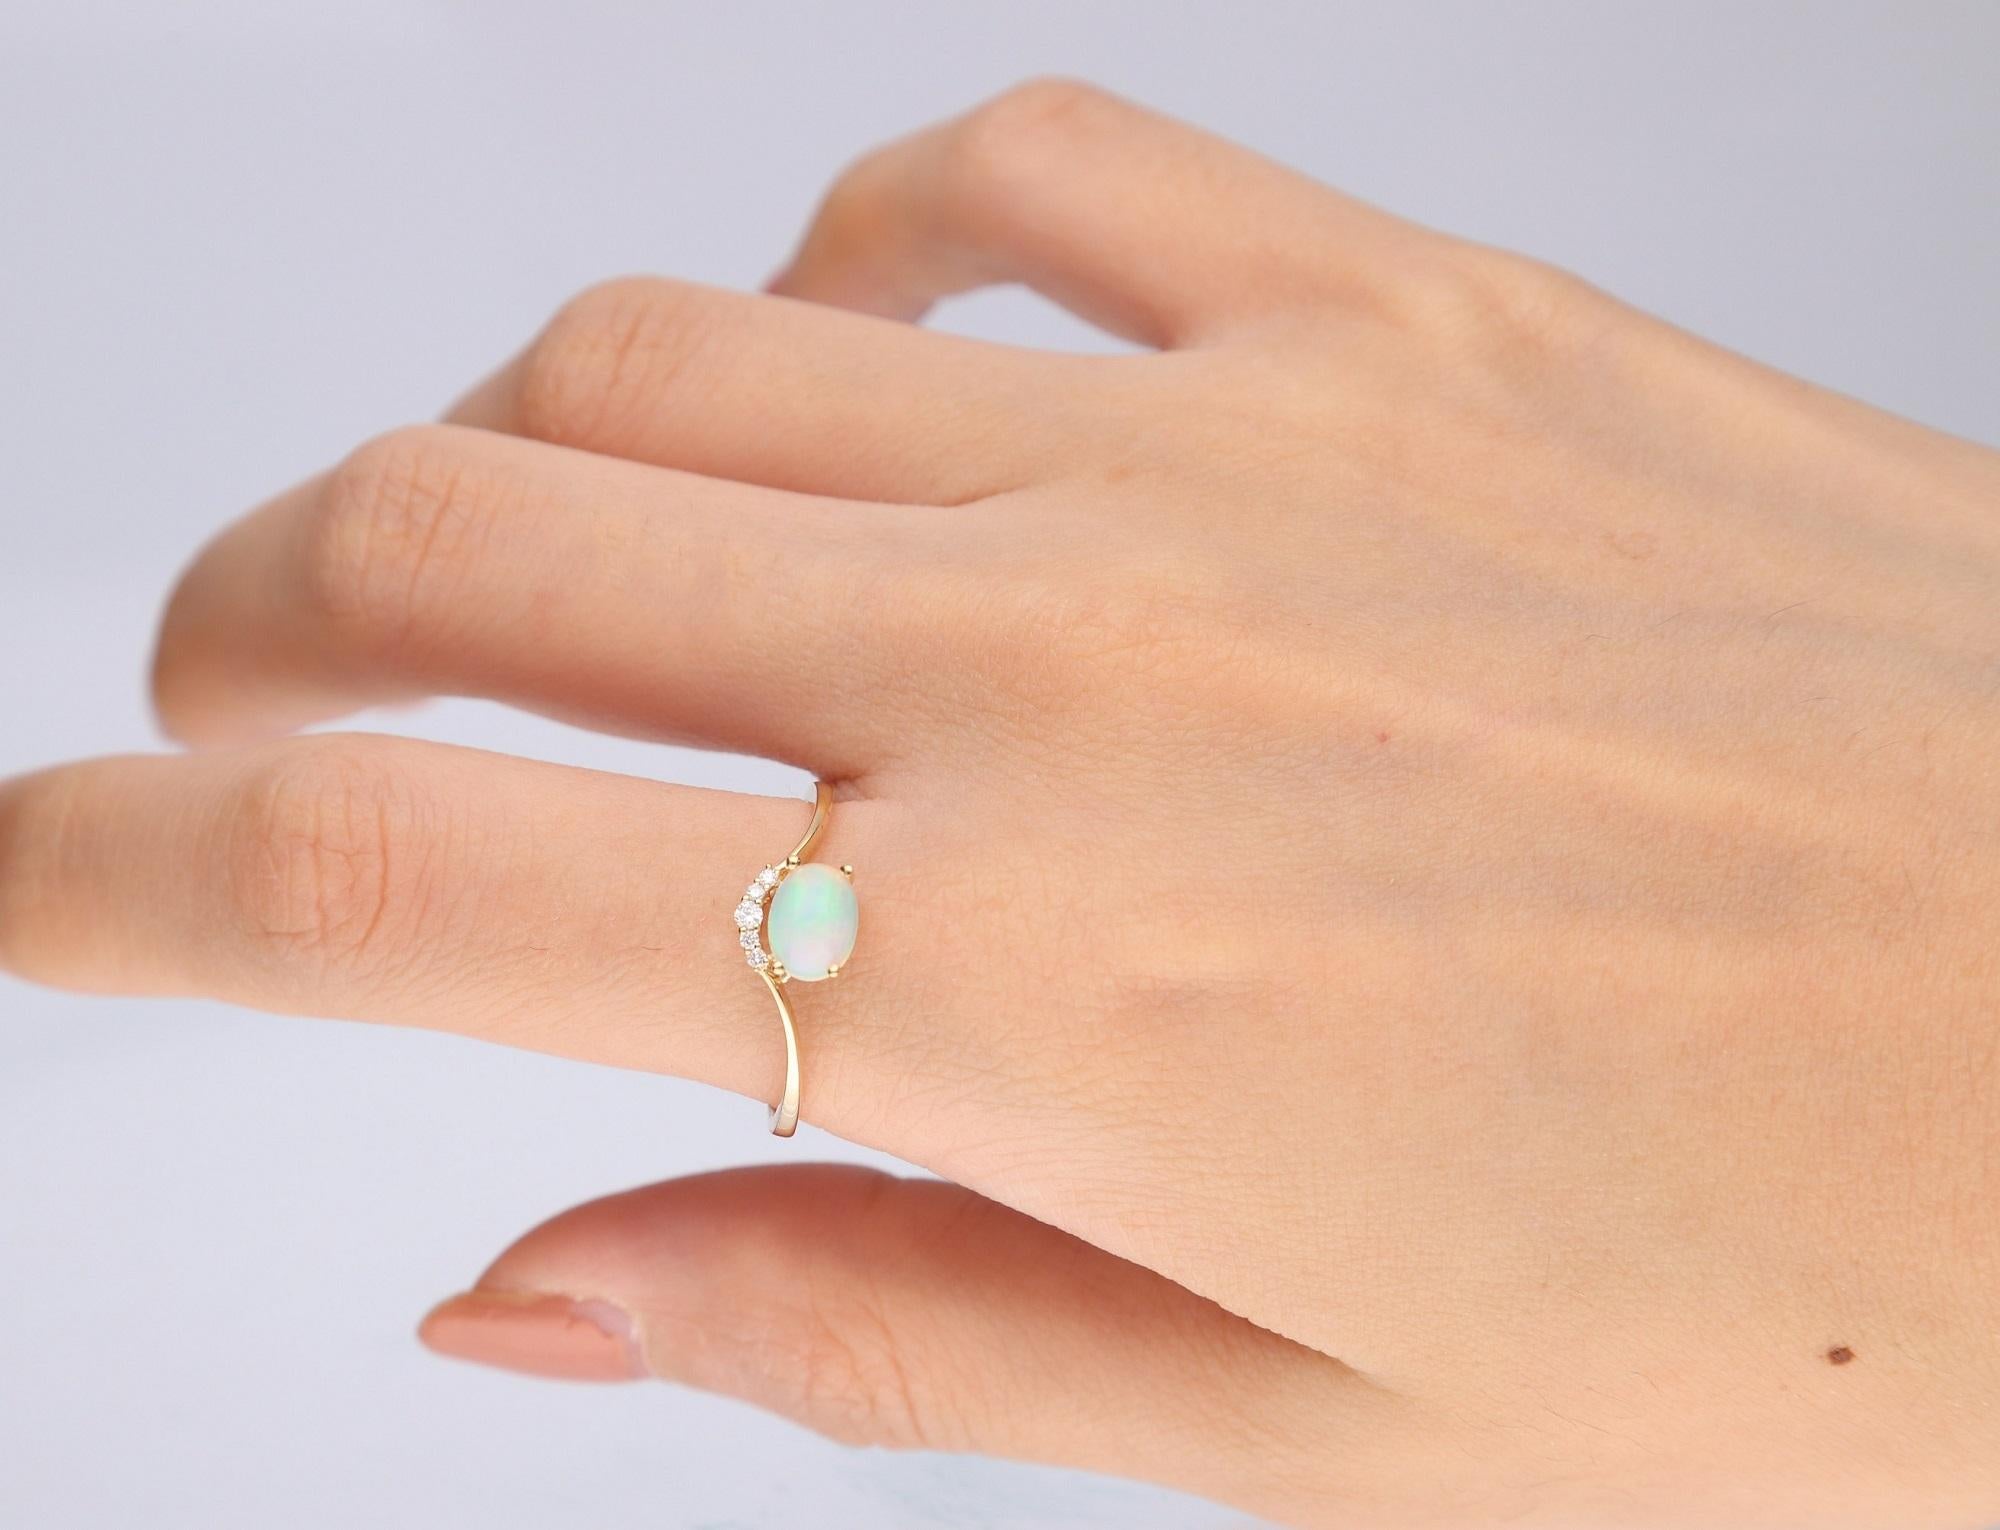 Stunning, timeless and classy eternity Unique ring. Decorate yourself in luxury with this Gin & Grace ring. This ring is made up of 7x5 MM Oval-cut Prong Setting Ethiopian Opal (1pcs) 0.65 Carat and Round-Cut Prong Setting Diamond (5pcs) 0.04 Carat